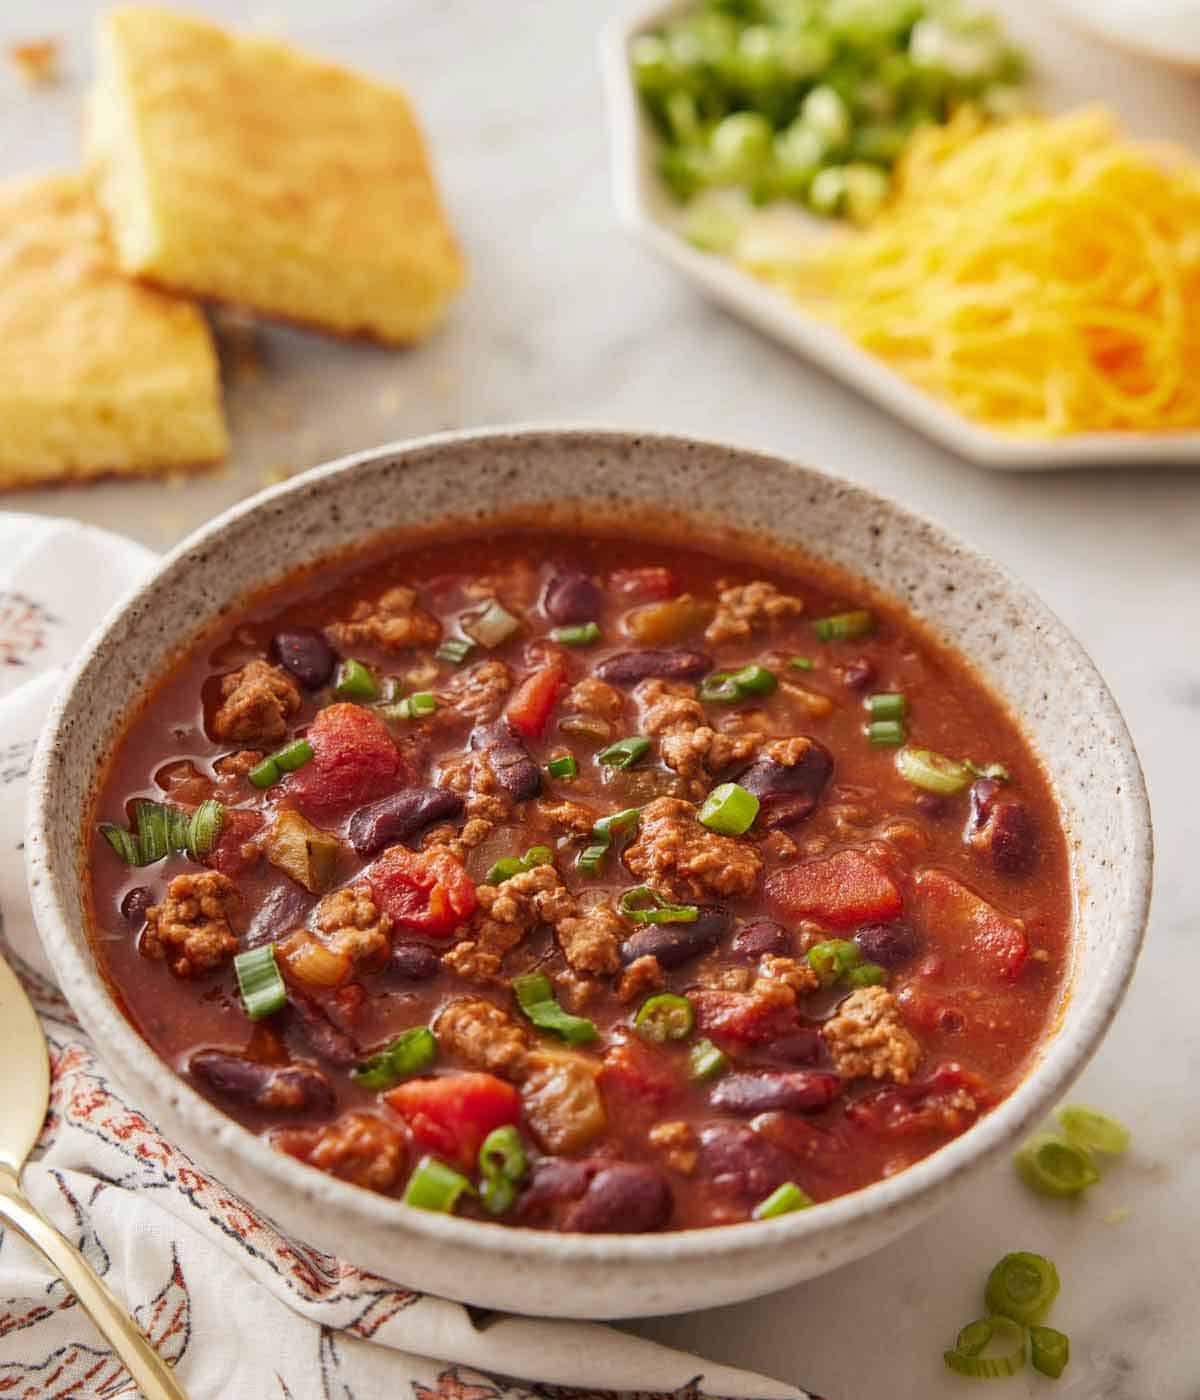 A bowl of slow cooker chili with toppings and cornbread in the background.